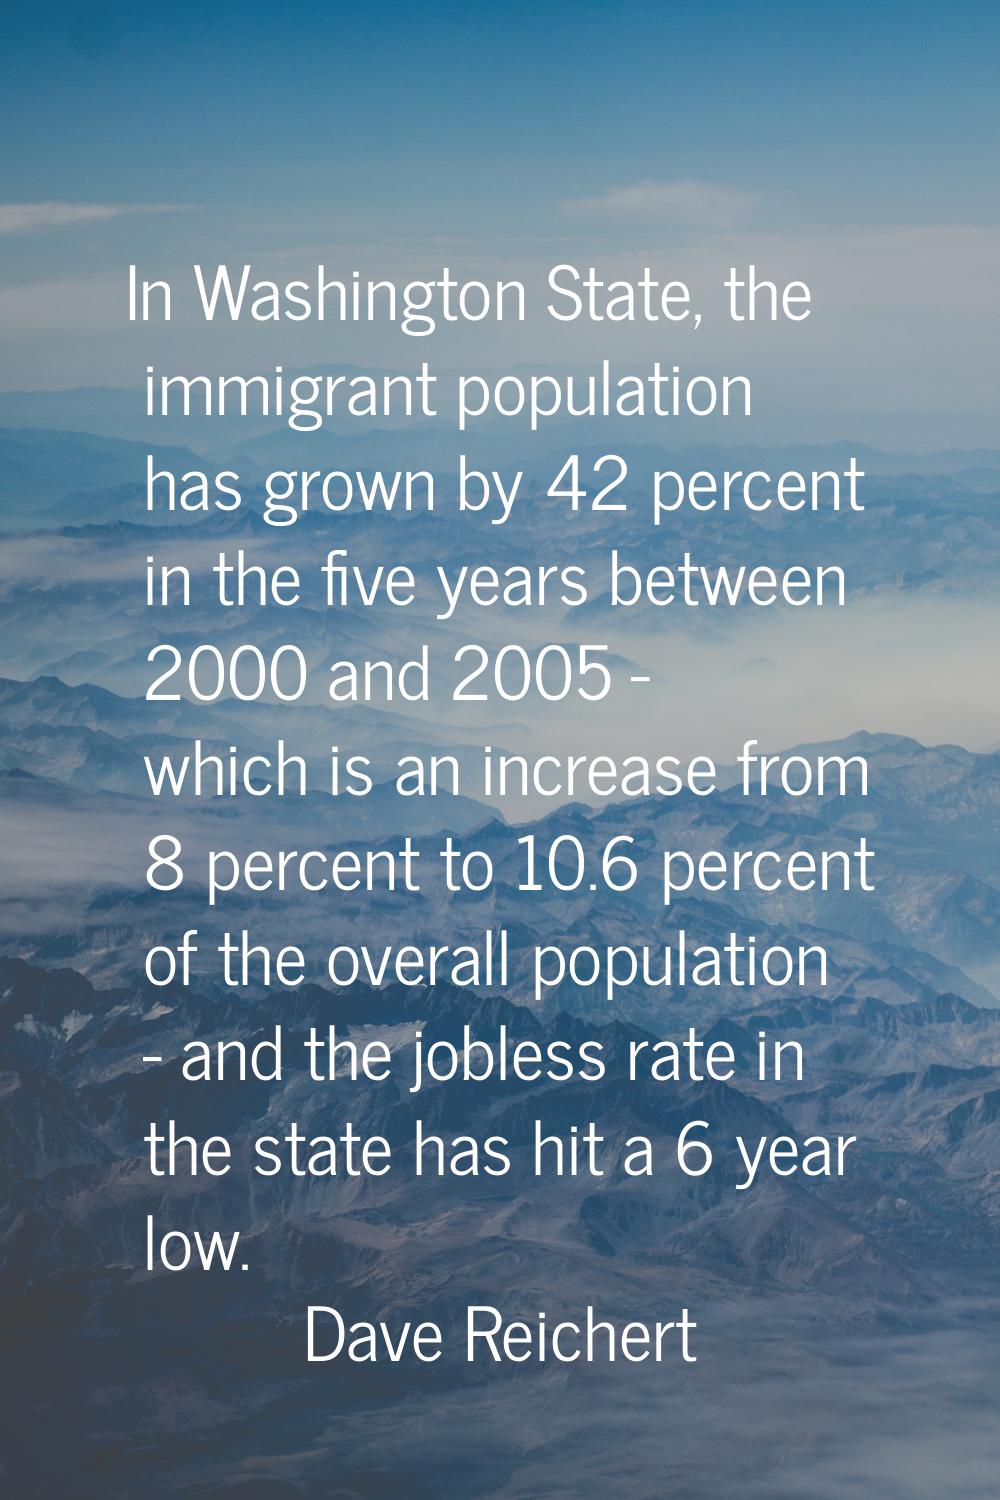 In Washington State, the immigrant population has grown by 42 percent in the five years between 200